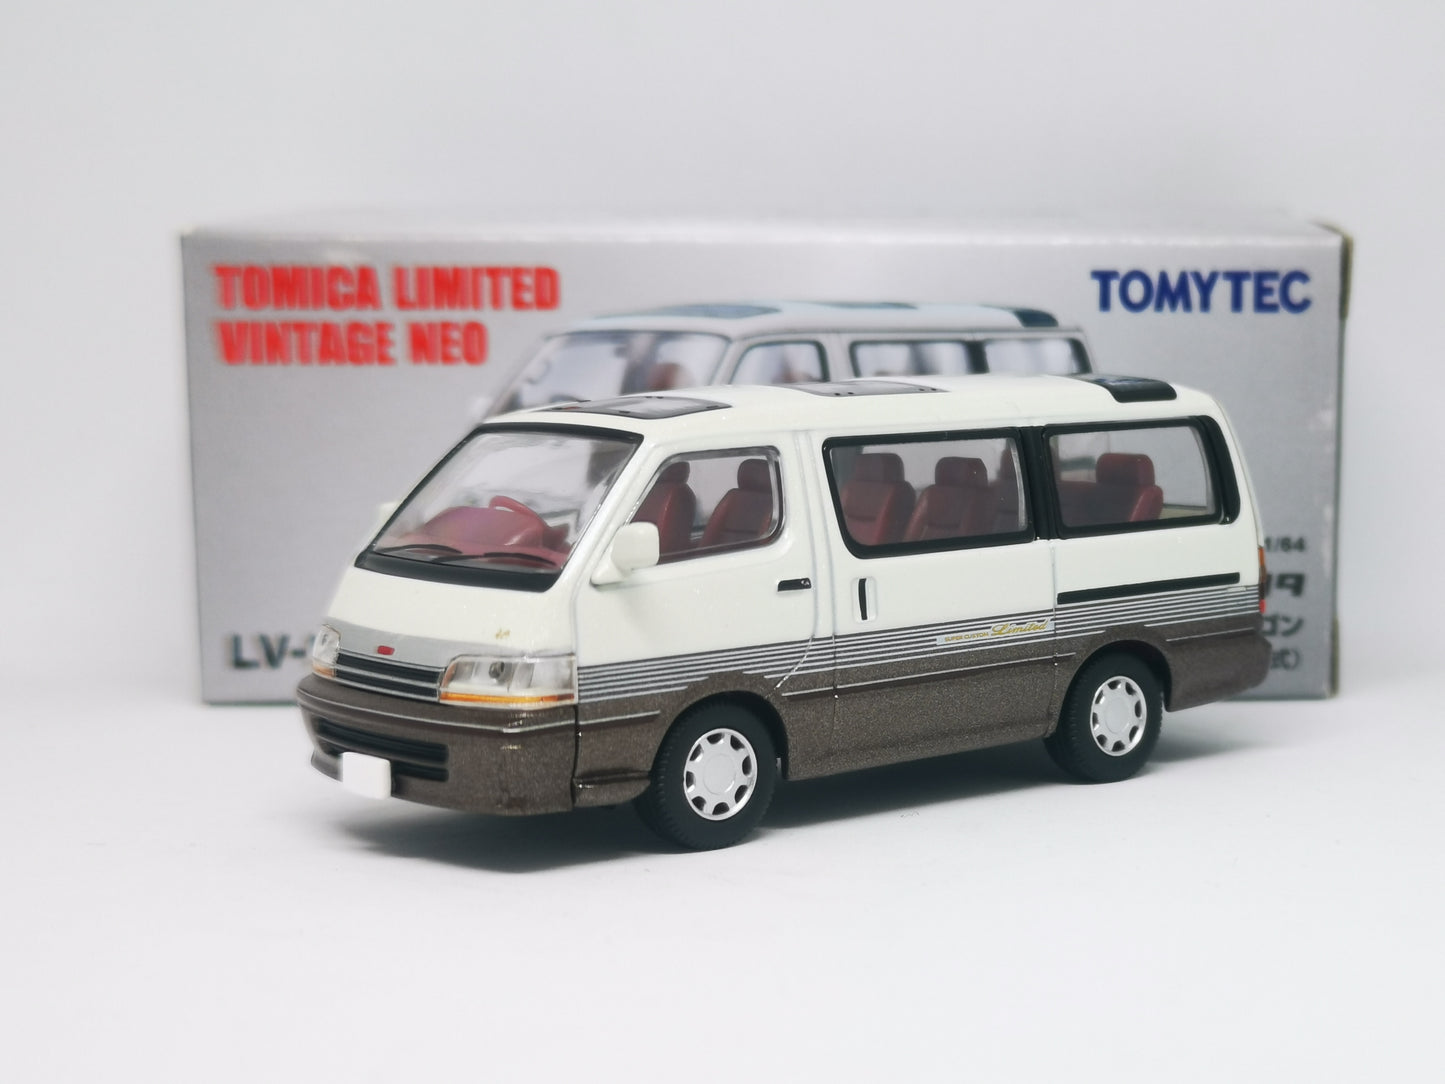 Tomica Limited Vintage Neo TOYOTA Hiace Wagon 2.4 Super Custom Limited 92 model (white / brown)